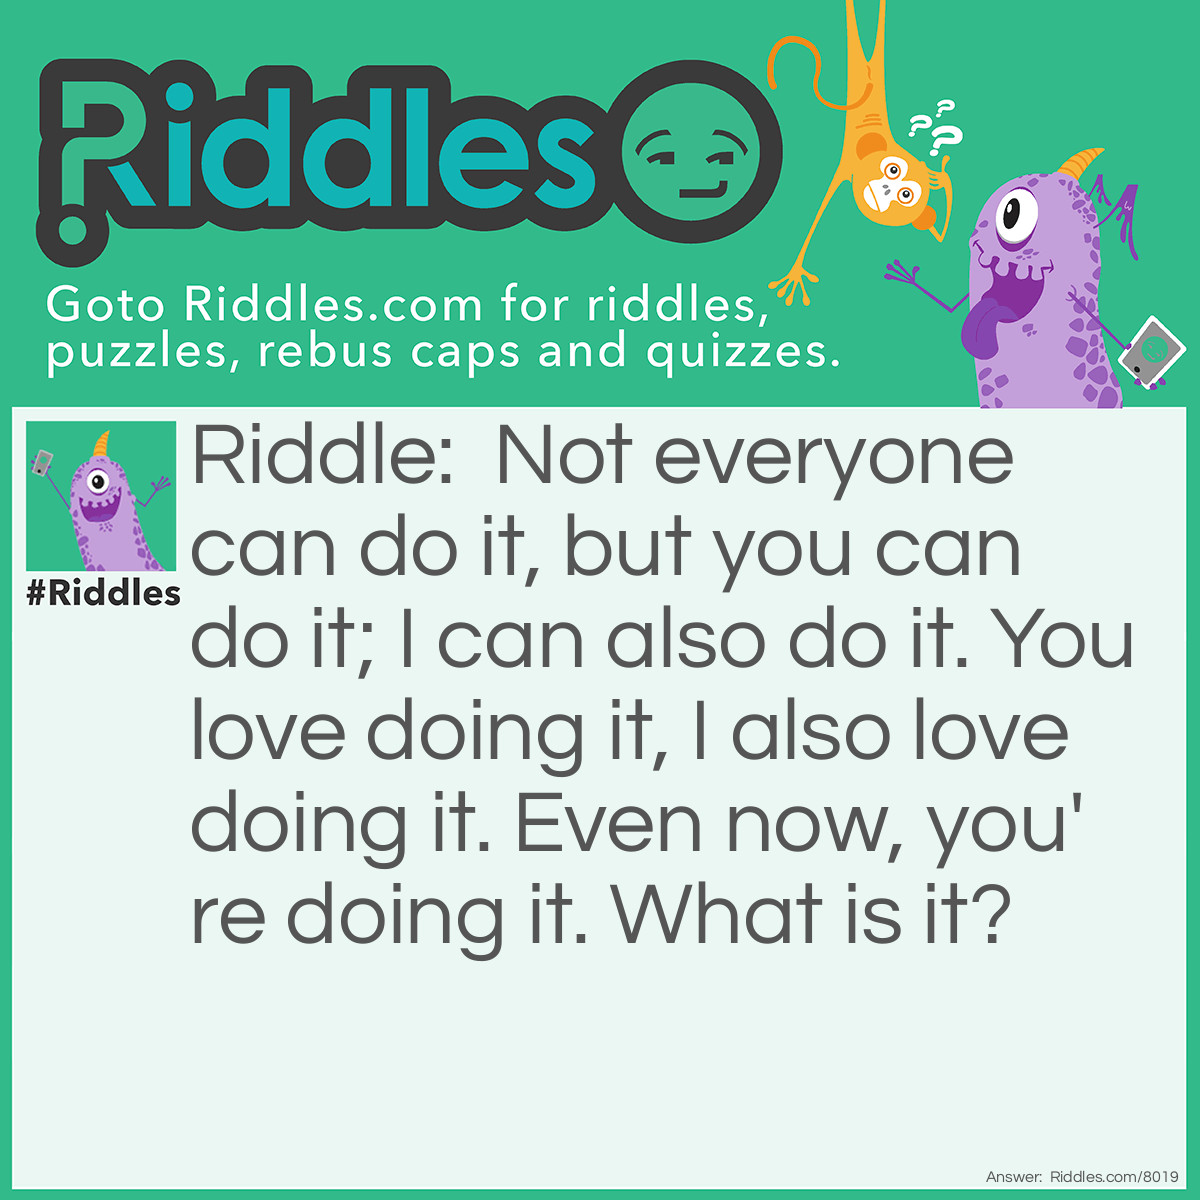 Riddle: Not everyone can do it, but you can do it; I can also do it. You love doing it, I also love doing it. Even now, you're doing it. What is it? Answer: Reading!